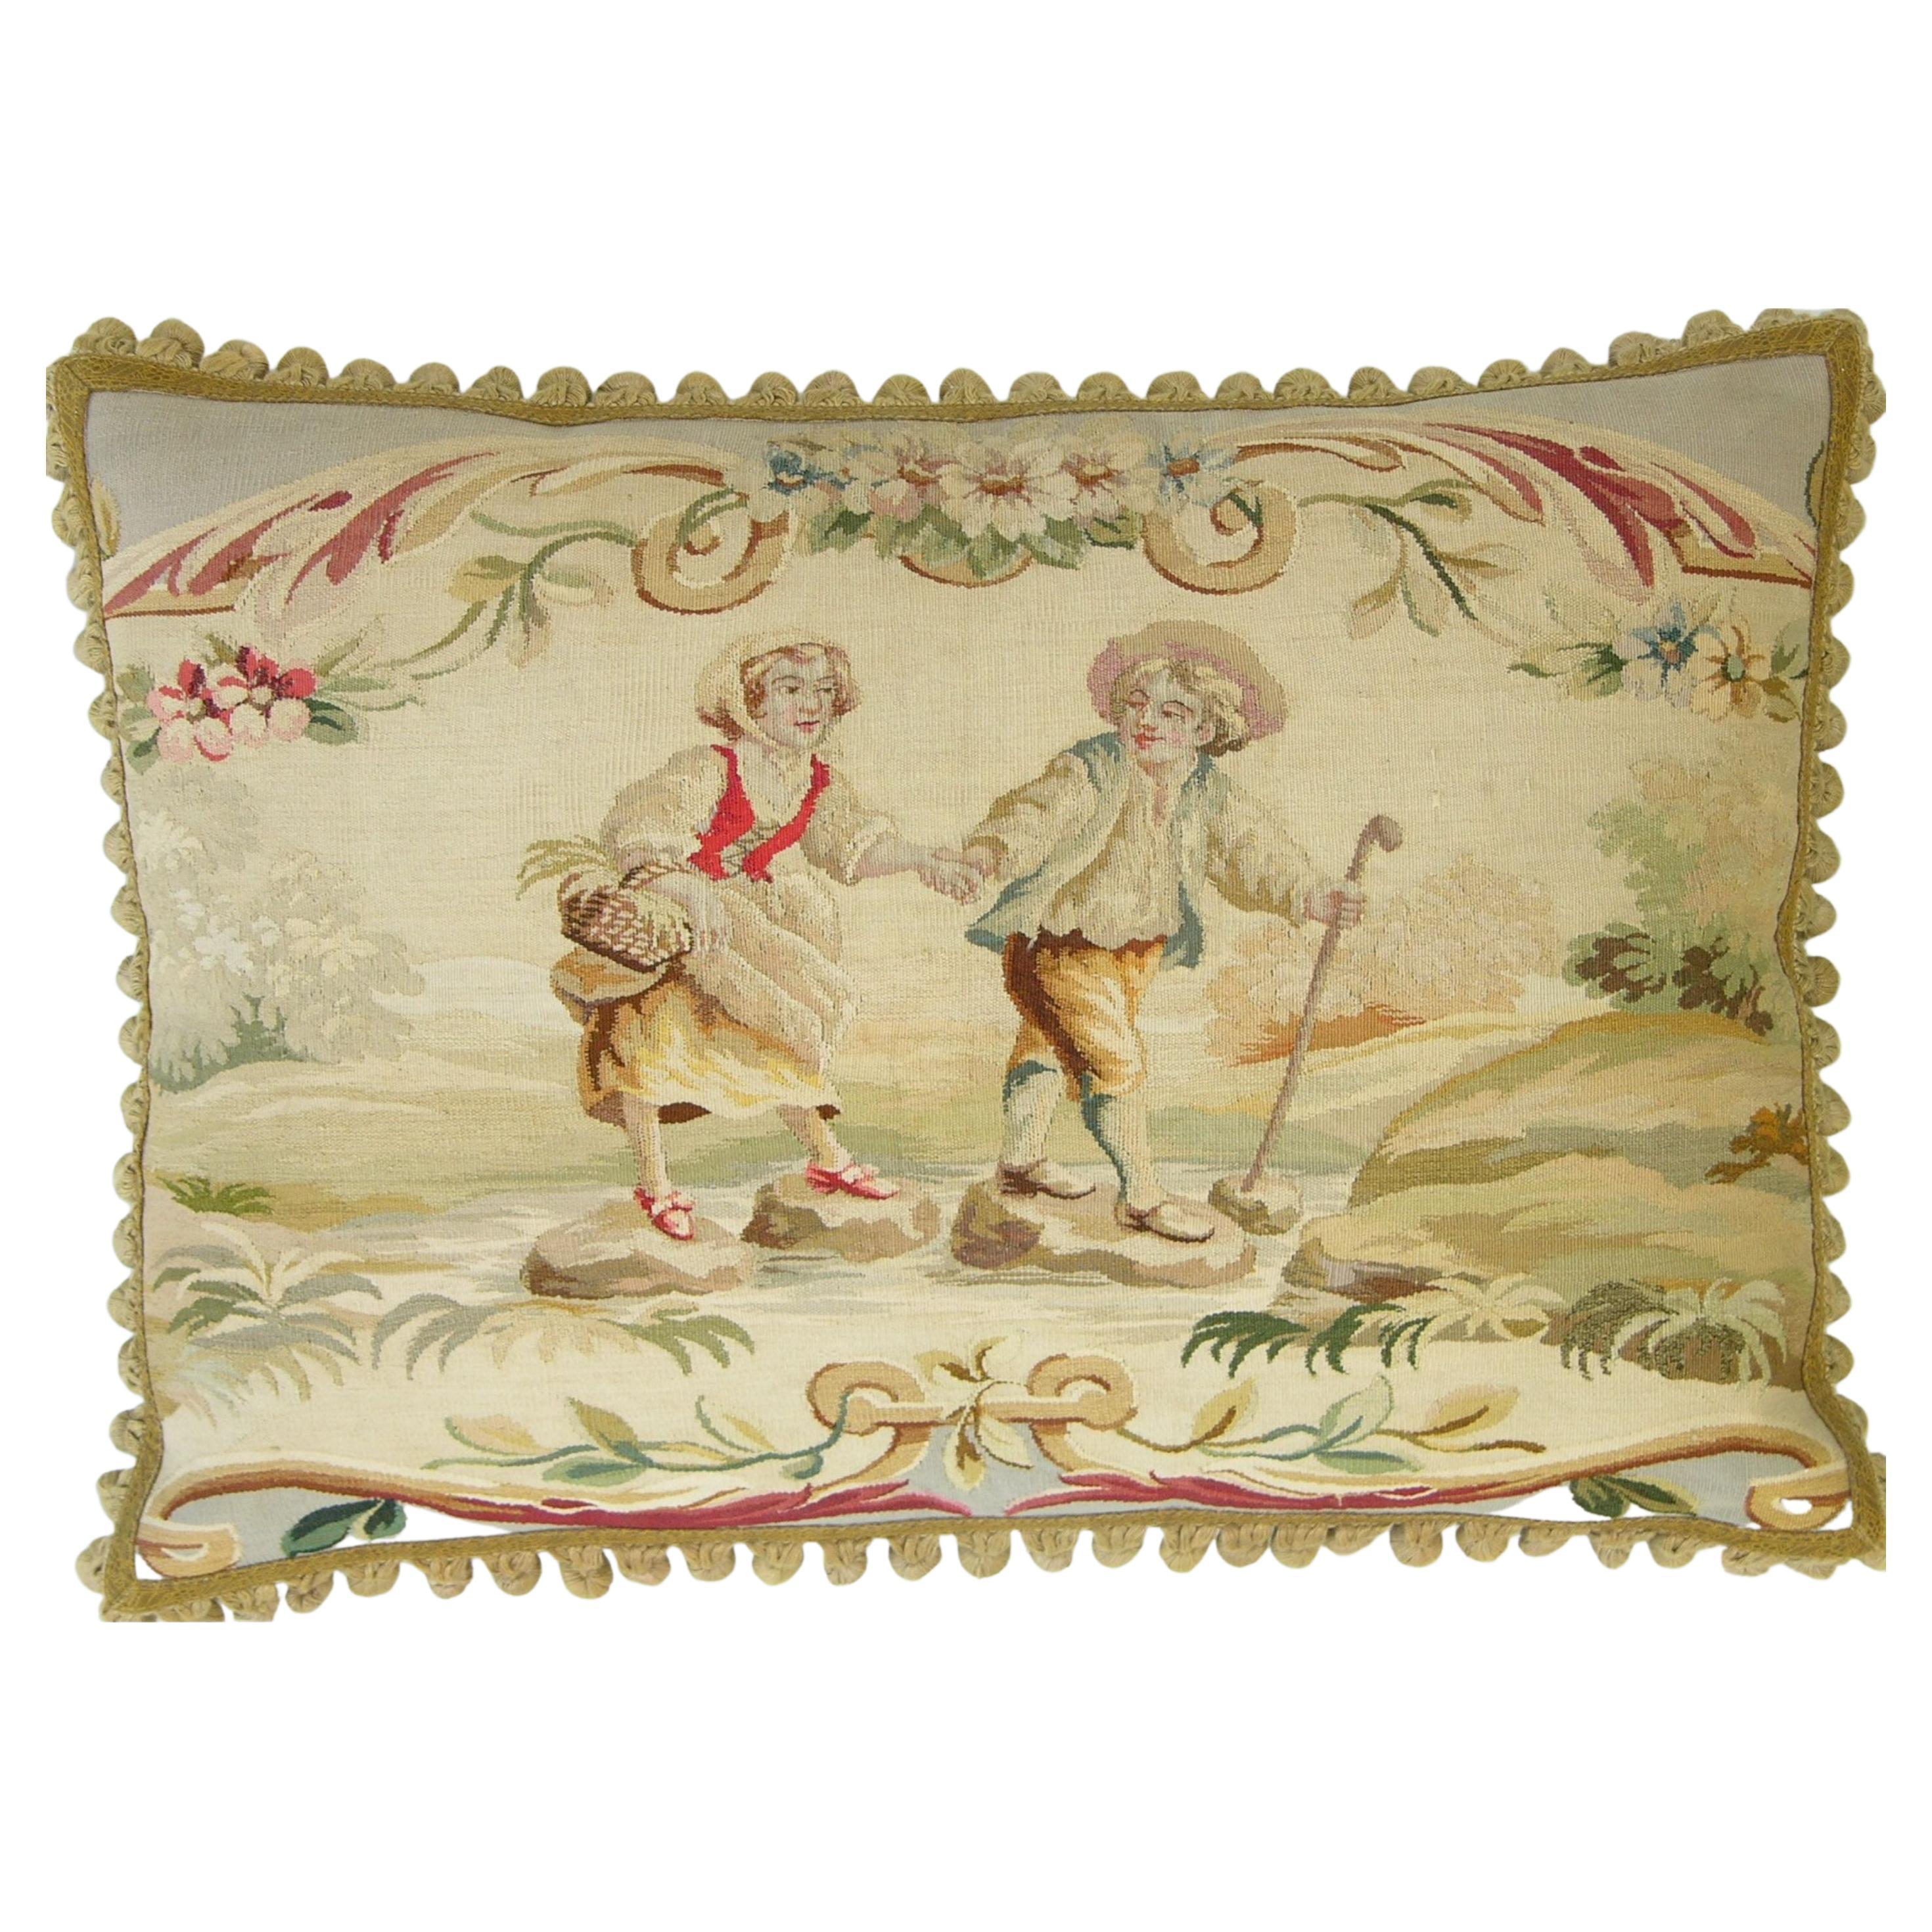 Circa 1850 Antique French Tapestry Pillow